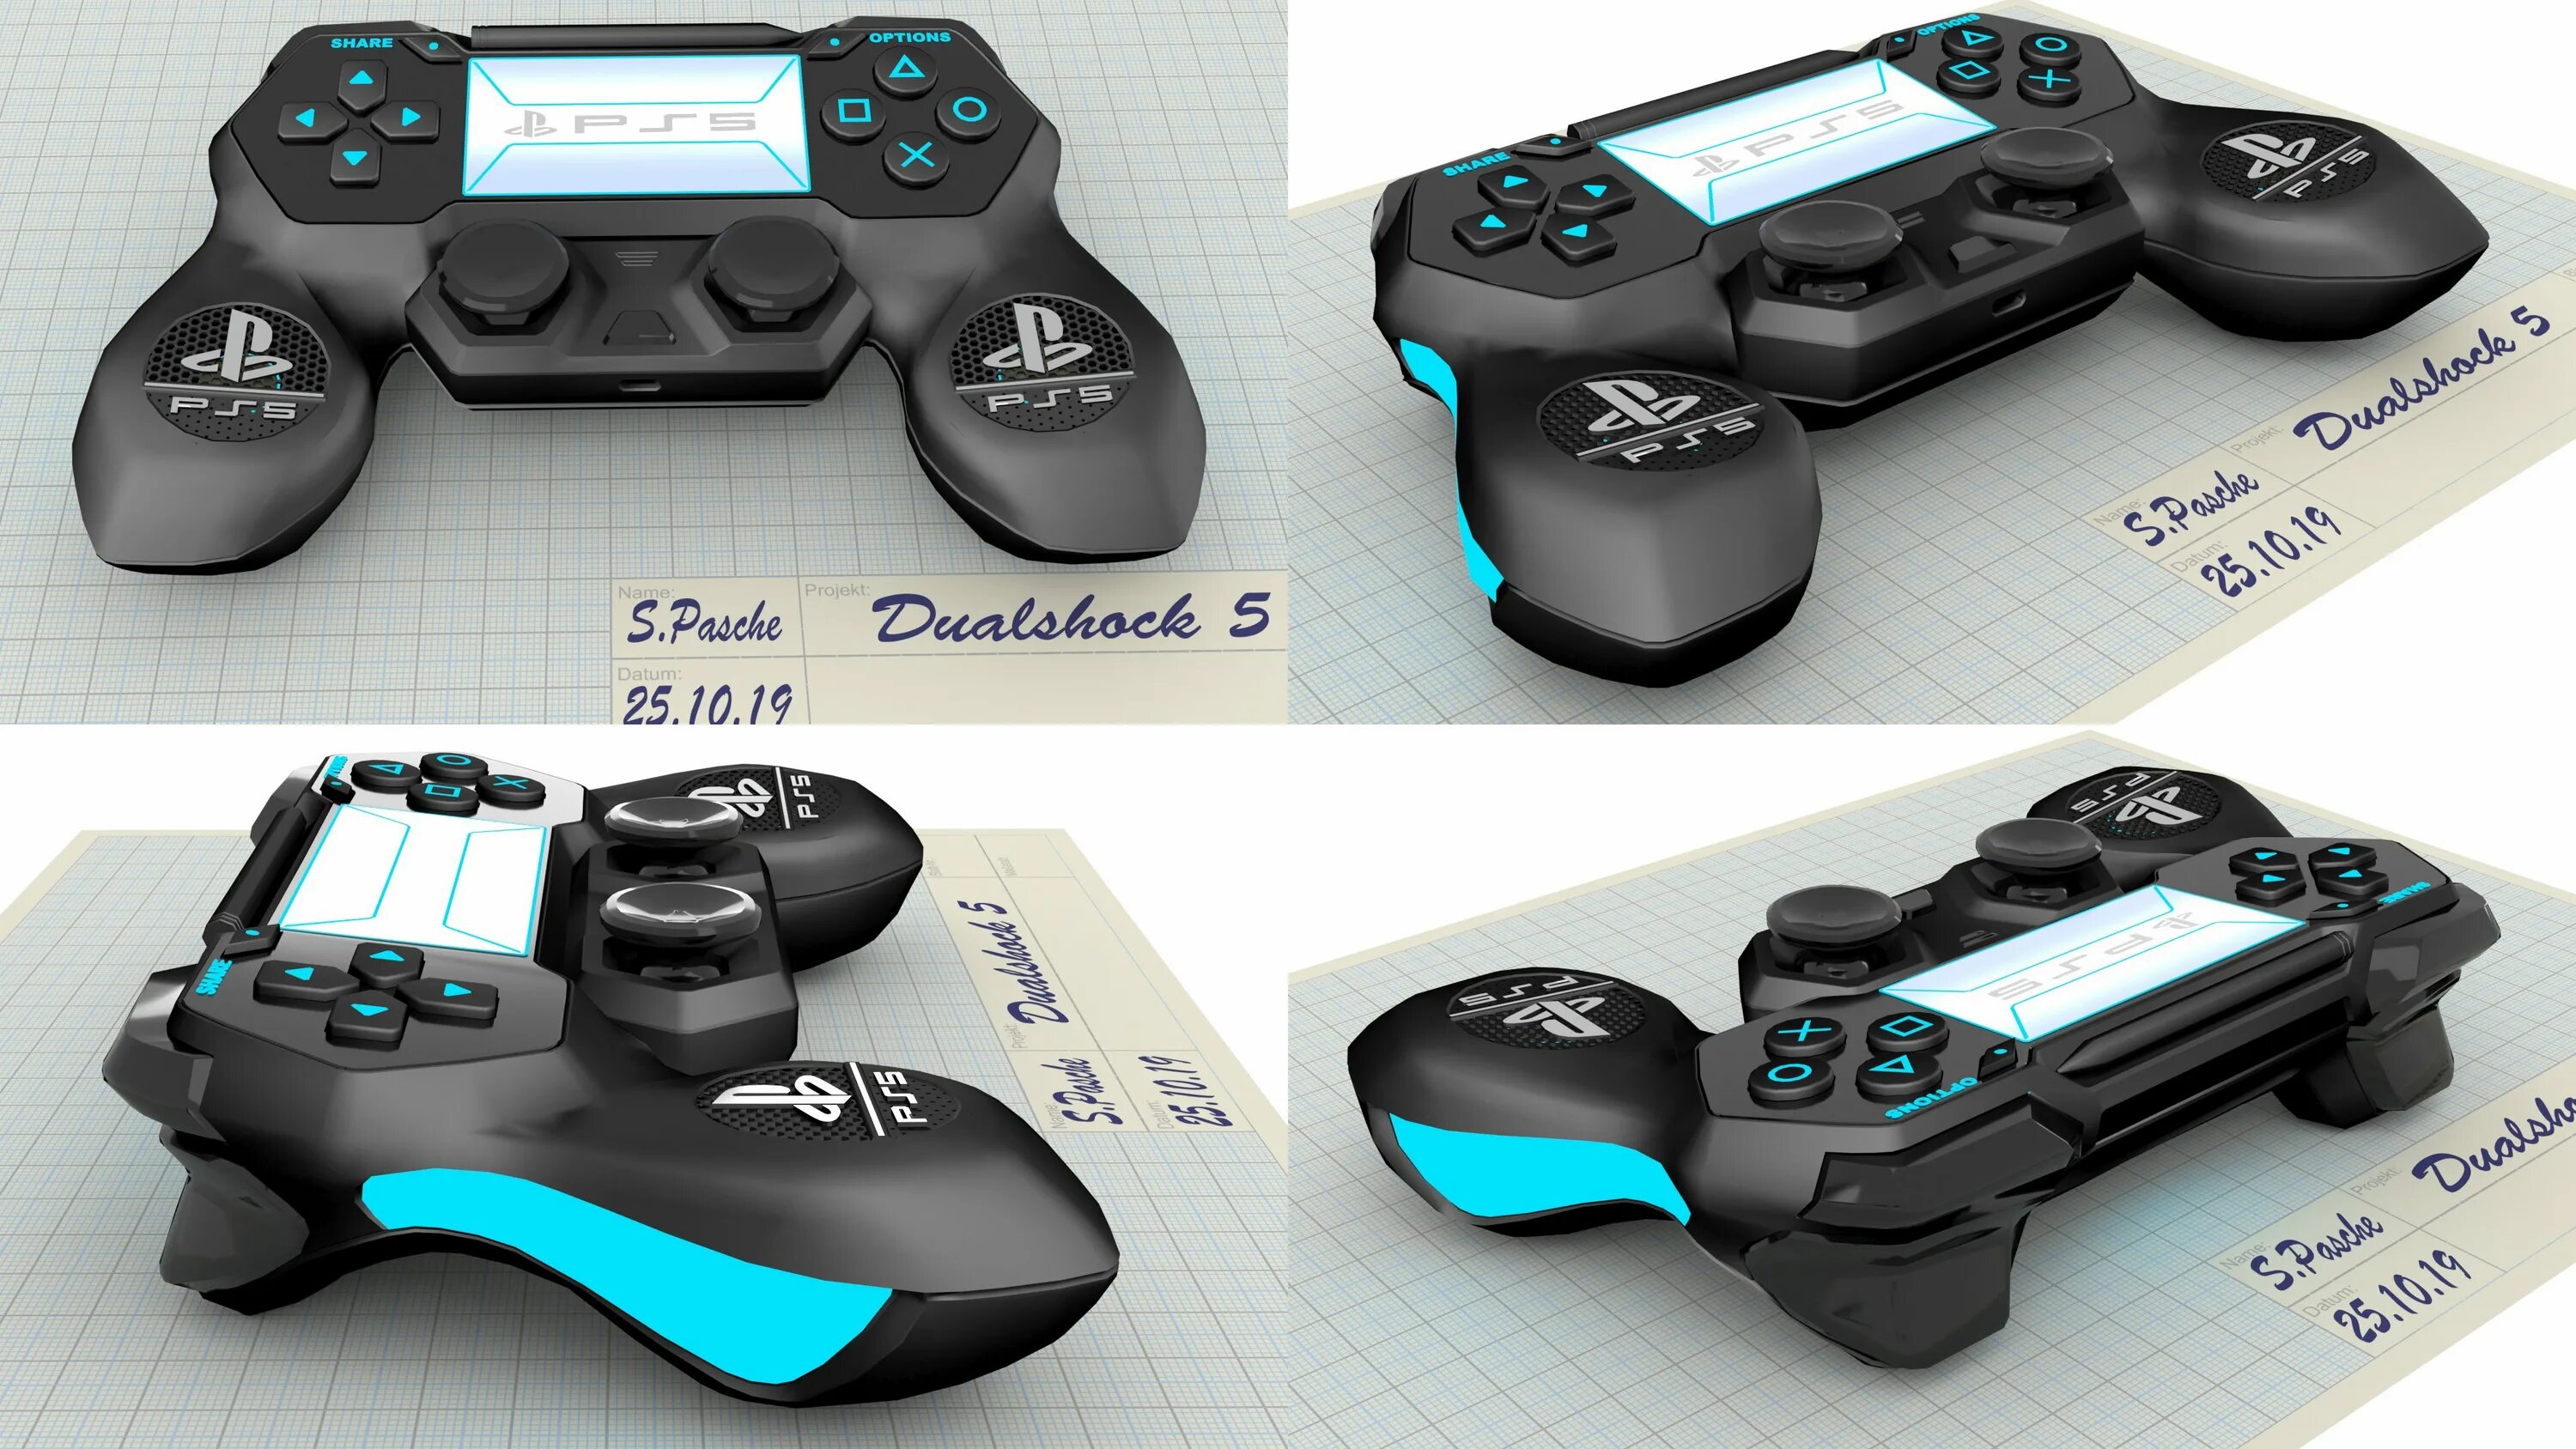 Sony Dualshock 5. Dualshock Sony ps5. Sony PLAYSTATION ps5 Console. Геймпад Sony PLAYSTATION 5 Dualsense. Ps4 playstation 5